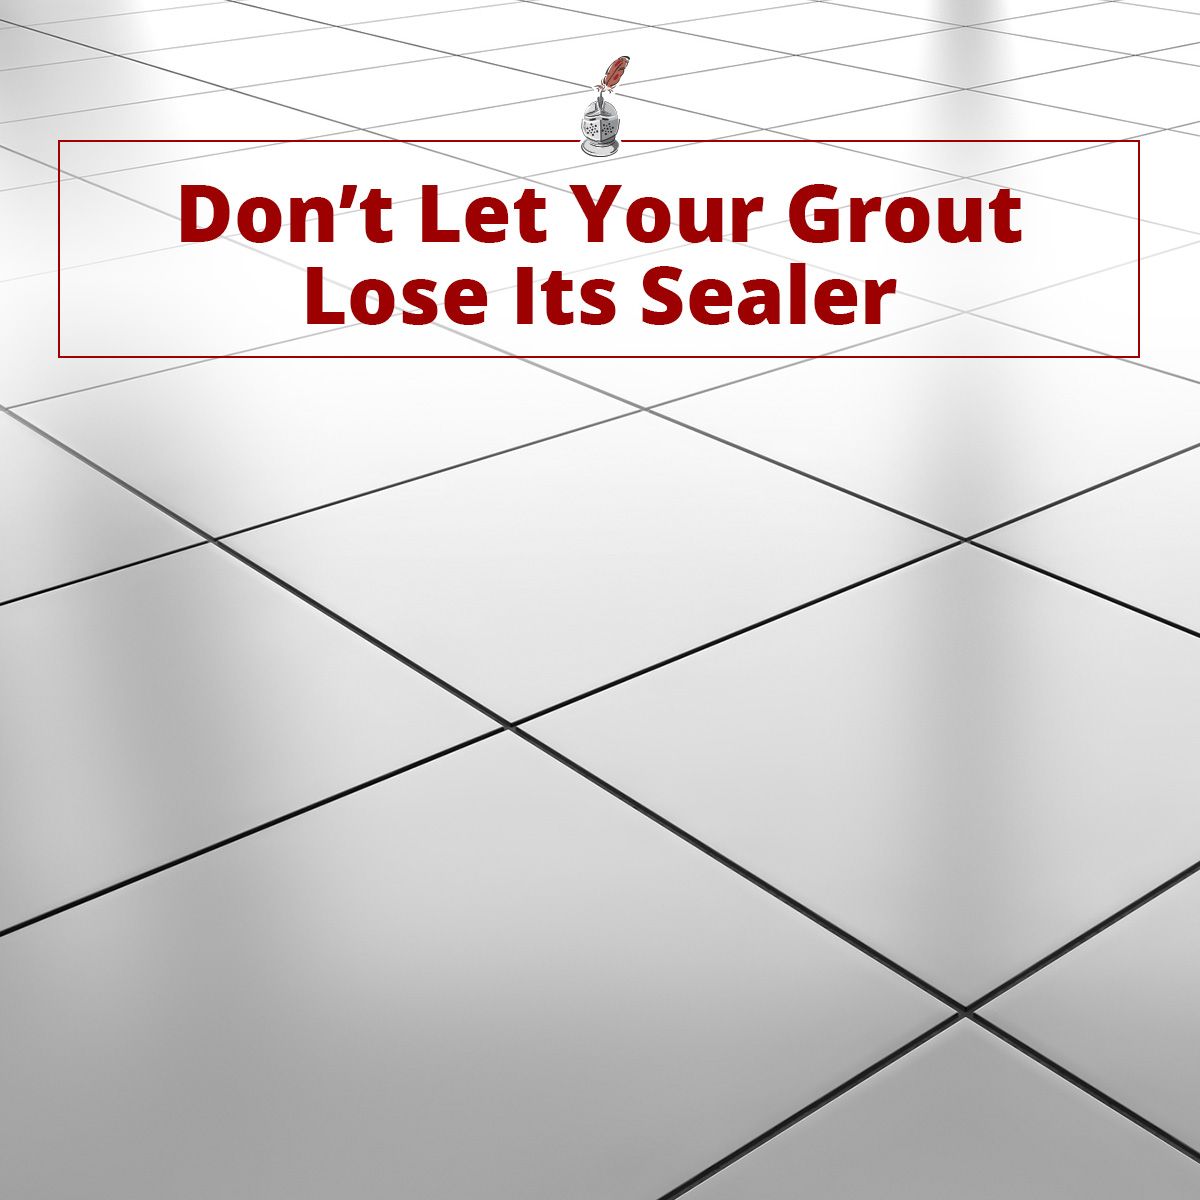 Don't Let Your Grout Lose Its Sealer